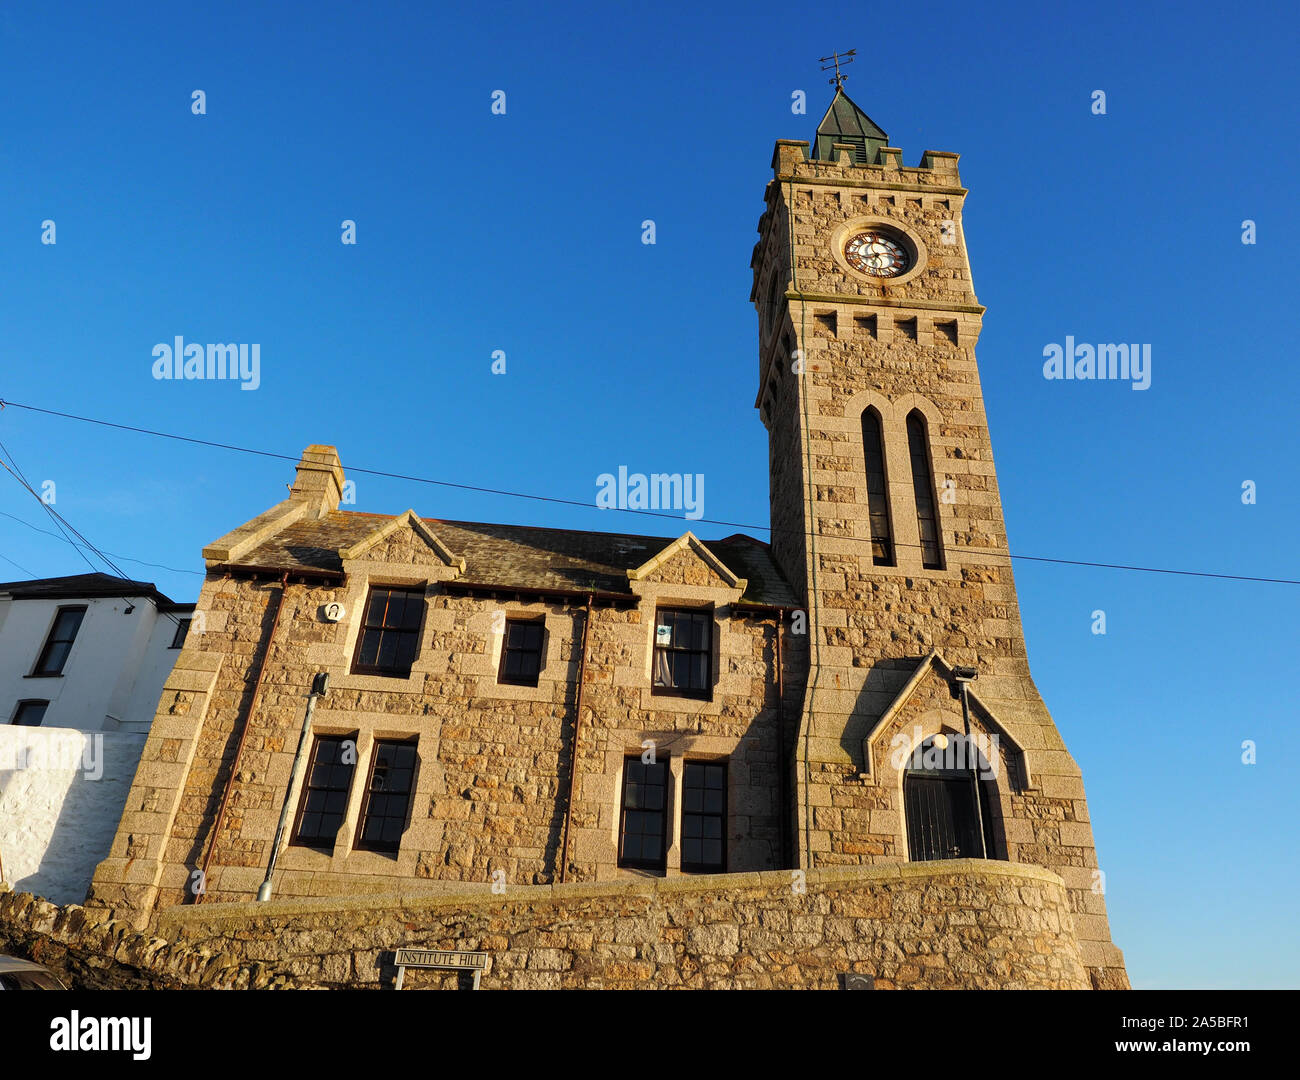 The Bickford-Smith Institute building at Porthleven, Cornwall, UK Stock Photo